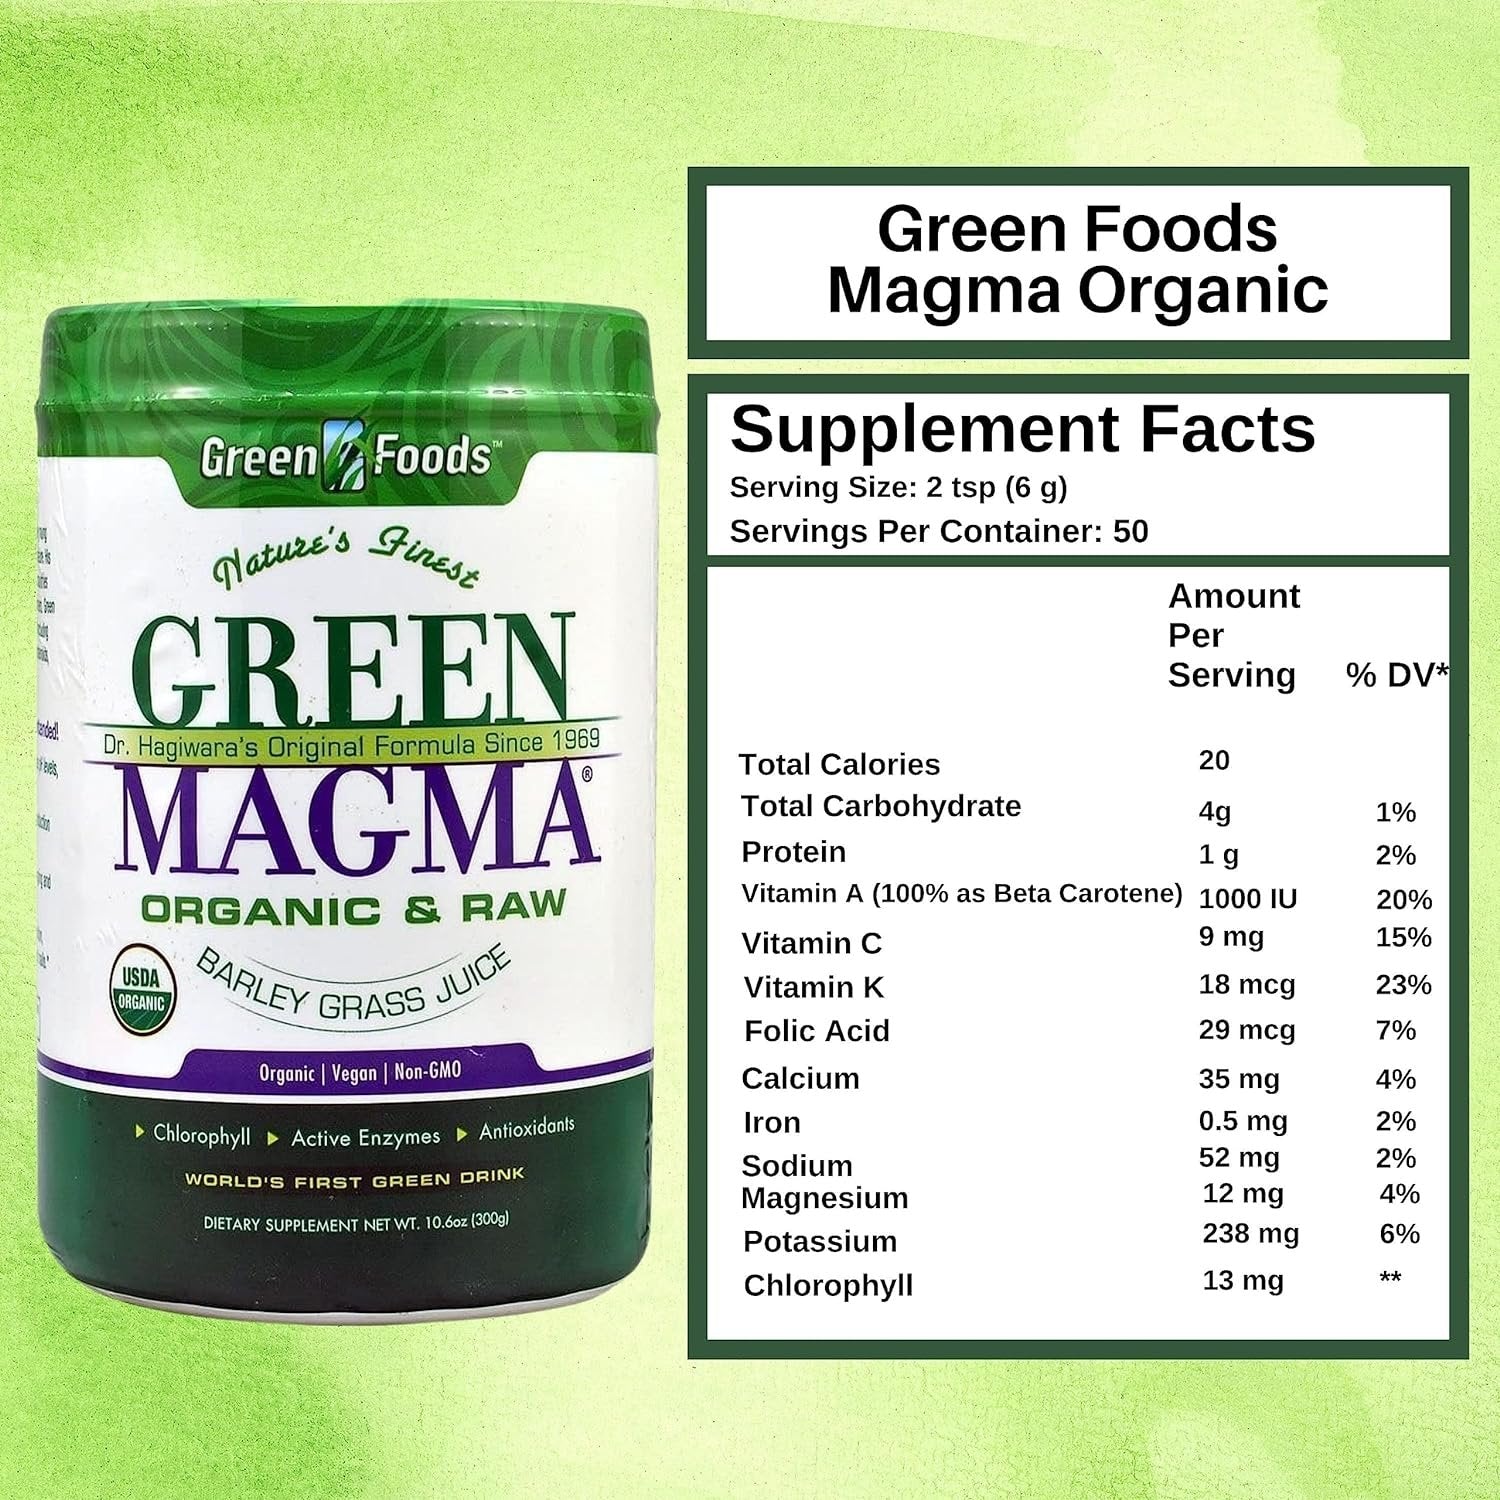 Worldwide Nutrition Green Foods, Green Magma Organic, Digestive Enzymes, Fiber Supplement & Whole Foods -10.6 Ounce Protein Powder Multi Purpose Key Chain